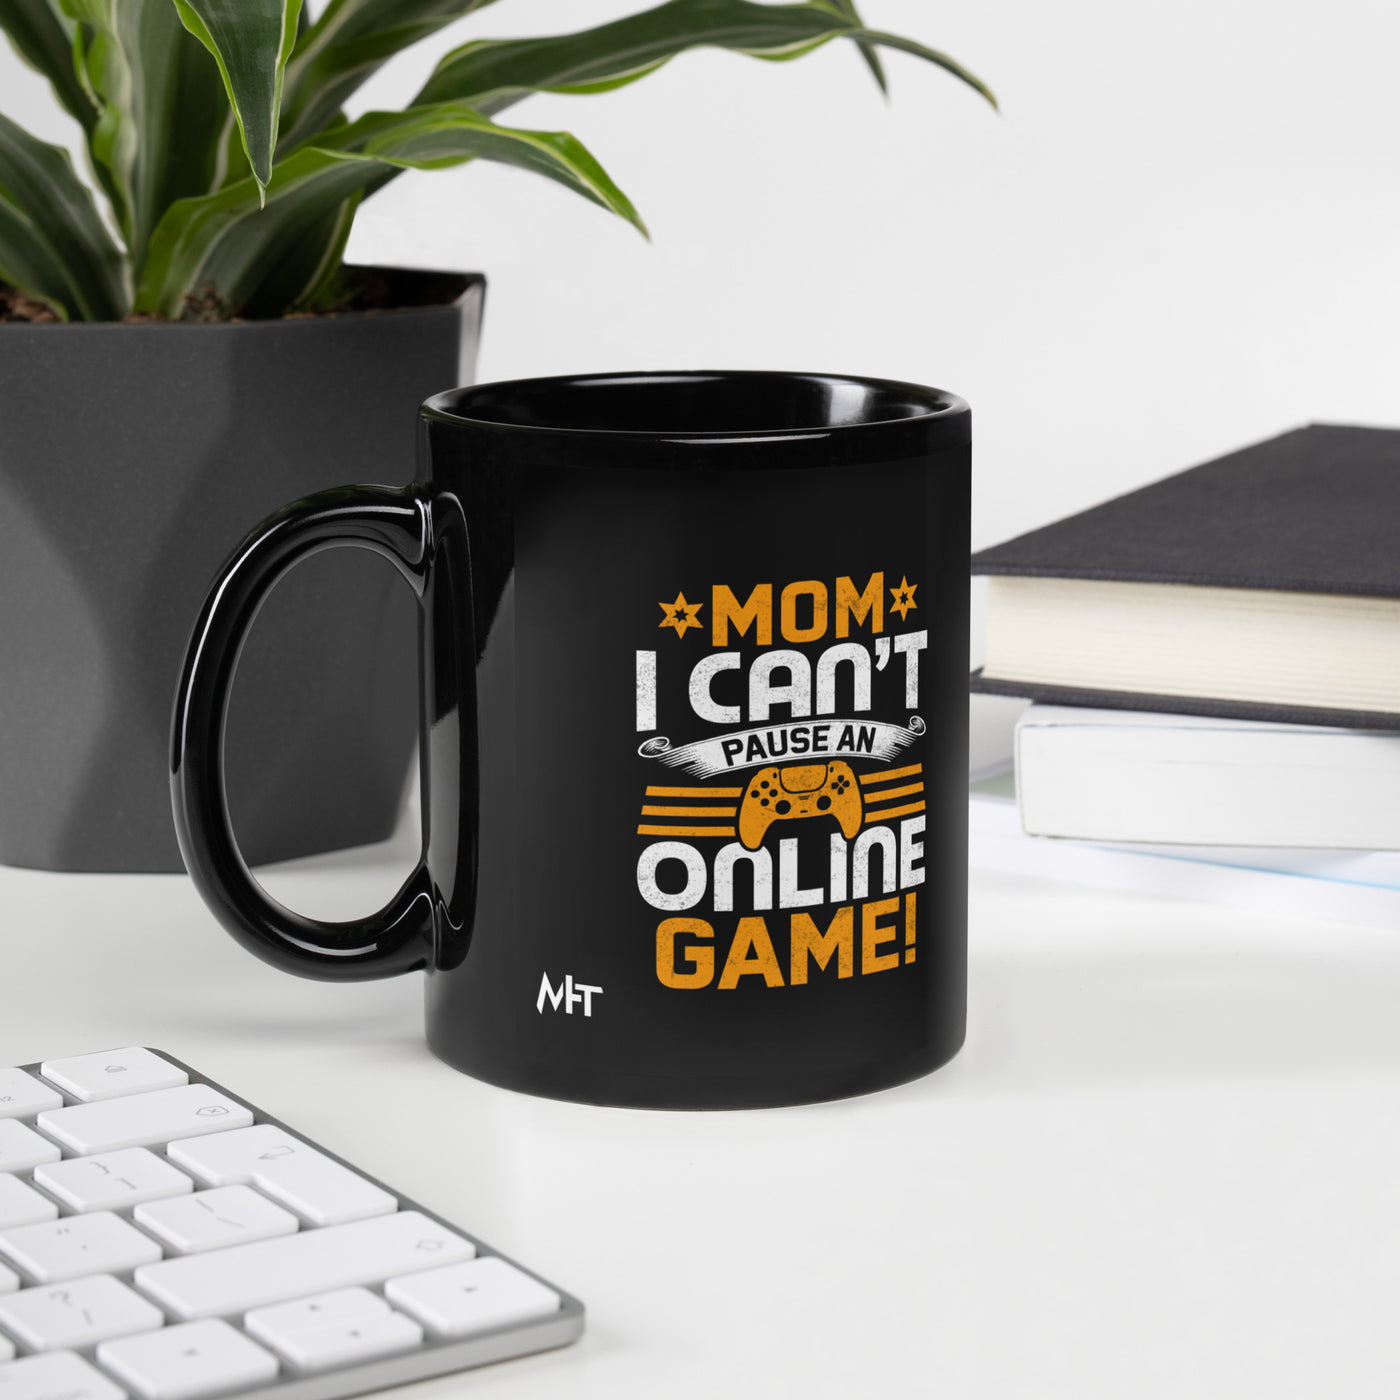 *MOM*! I can't Pause an Online Game - Black Glossy Mug